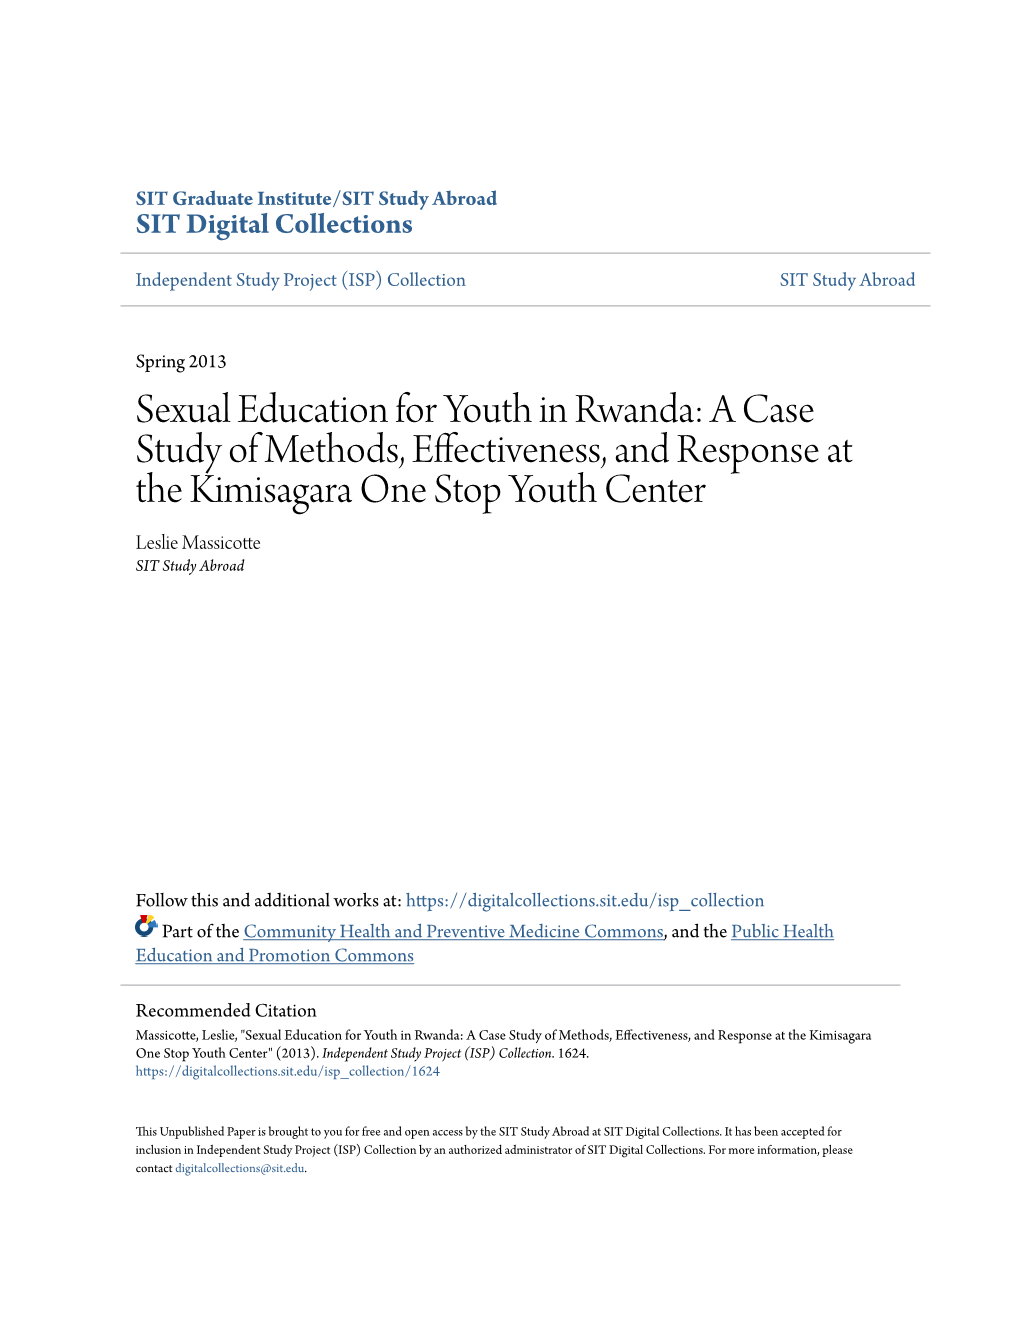 Sexual Education for Youth in Rwanda: a Case Study of Methods, Effectiveness, and Response at the Kimisagara One Stop Youth Center Leslie Massicotte SIT Study Abroad